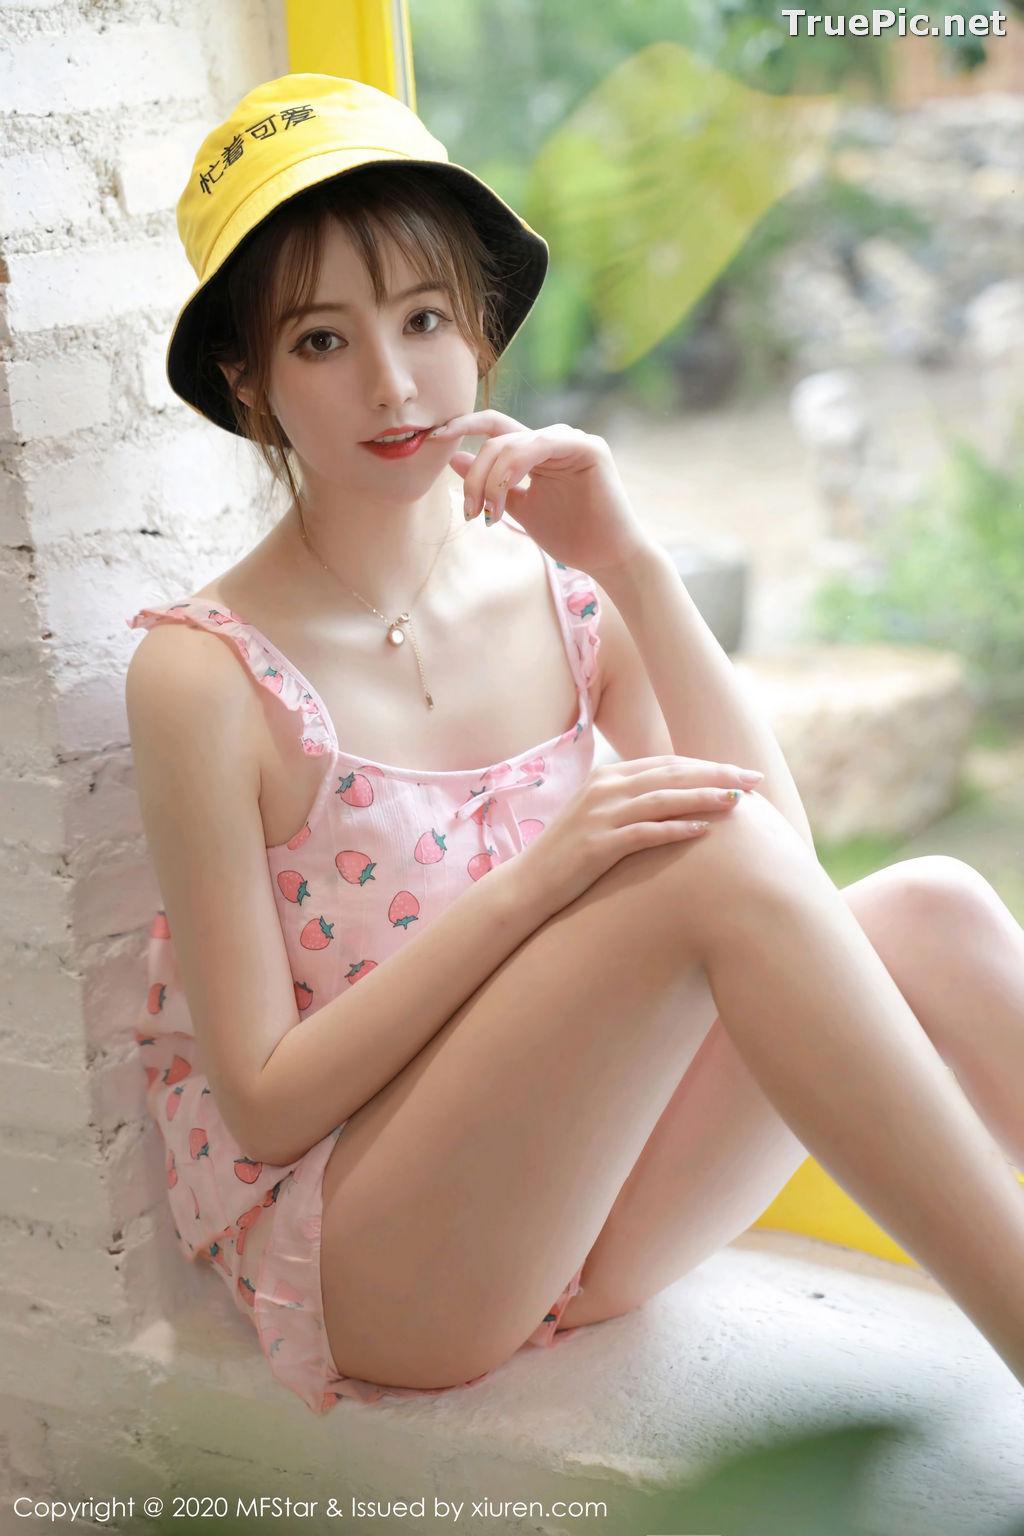 Image MFStar Vol.349 - Chinese Model Yoo优优 - Sexy and Cute Strawberry Girl - TruePic.net - Picture-16